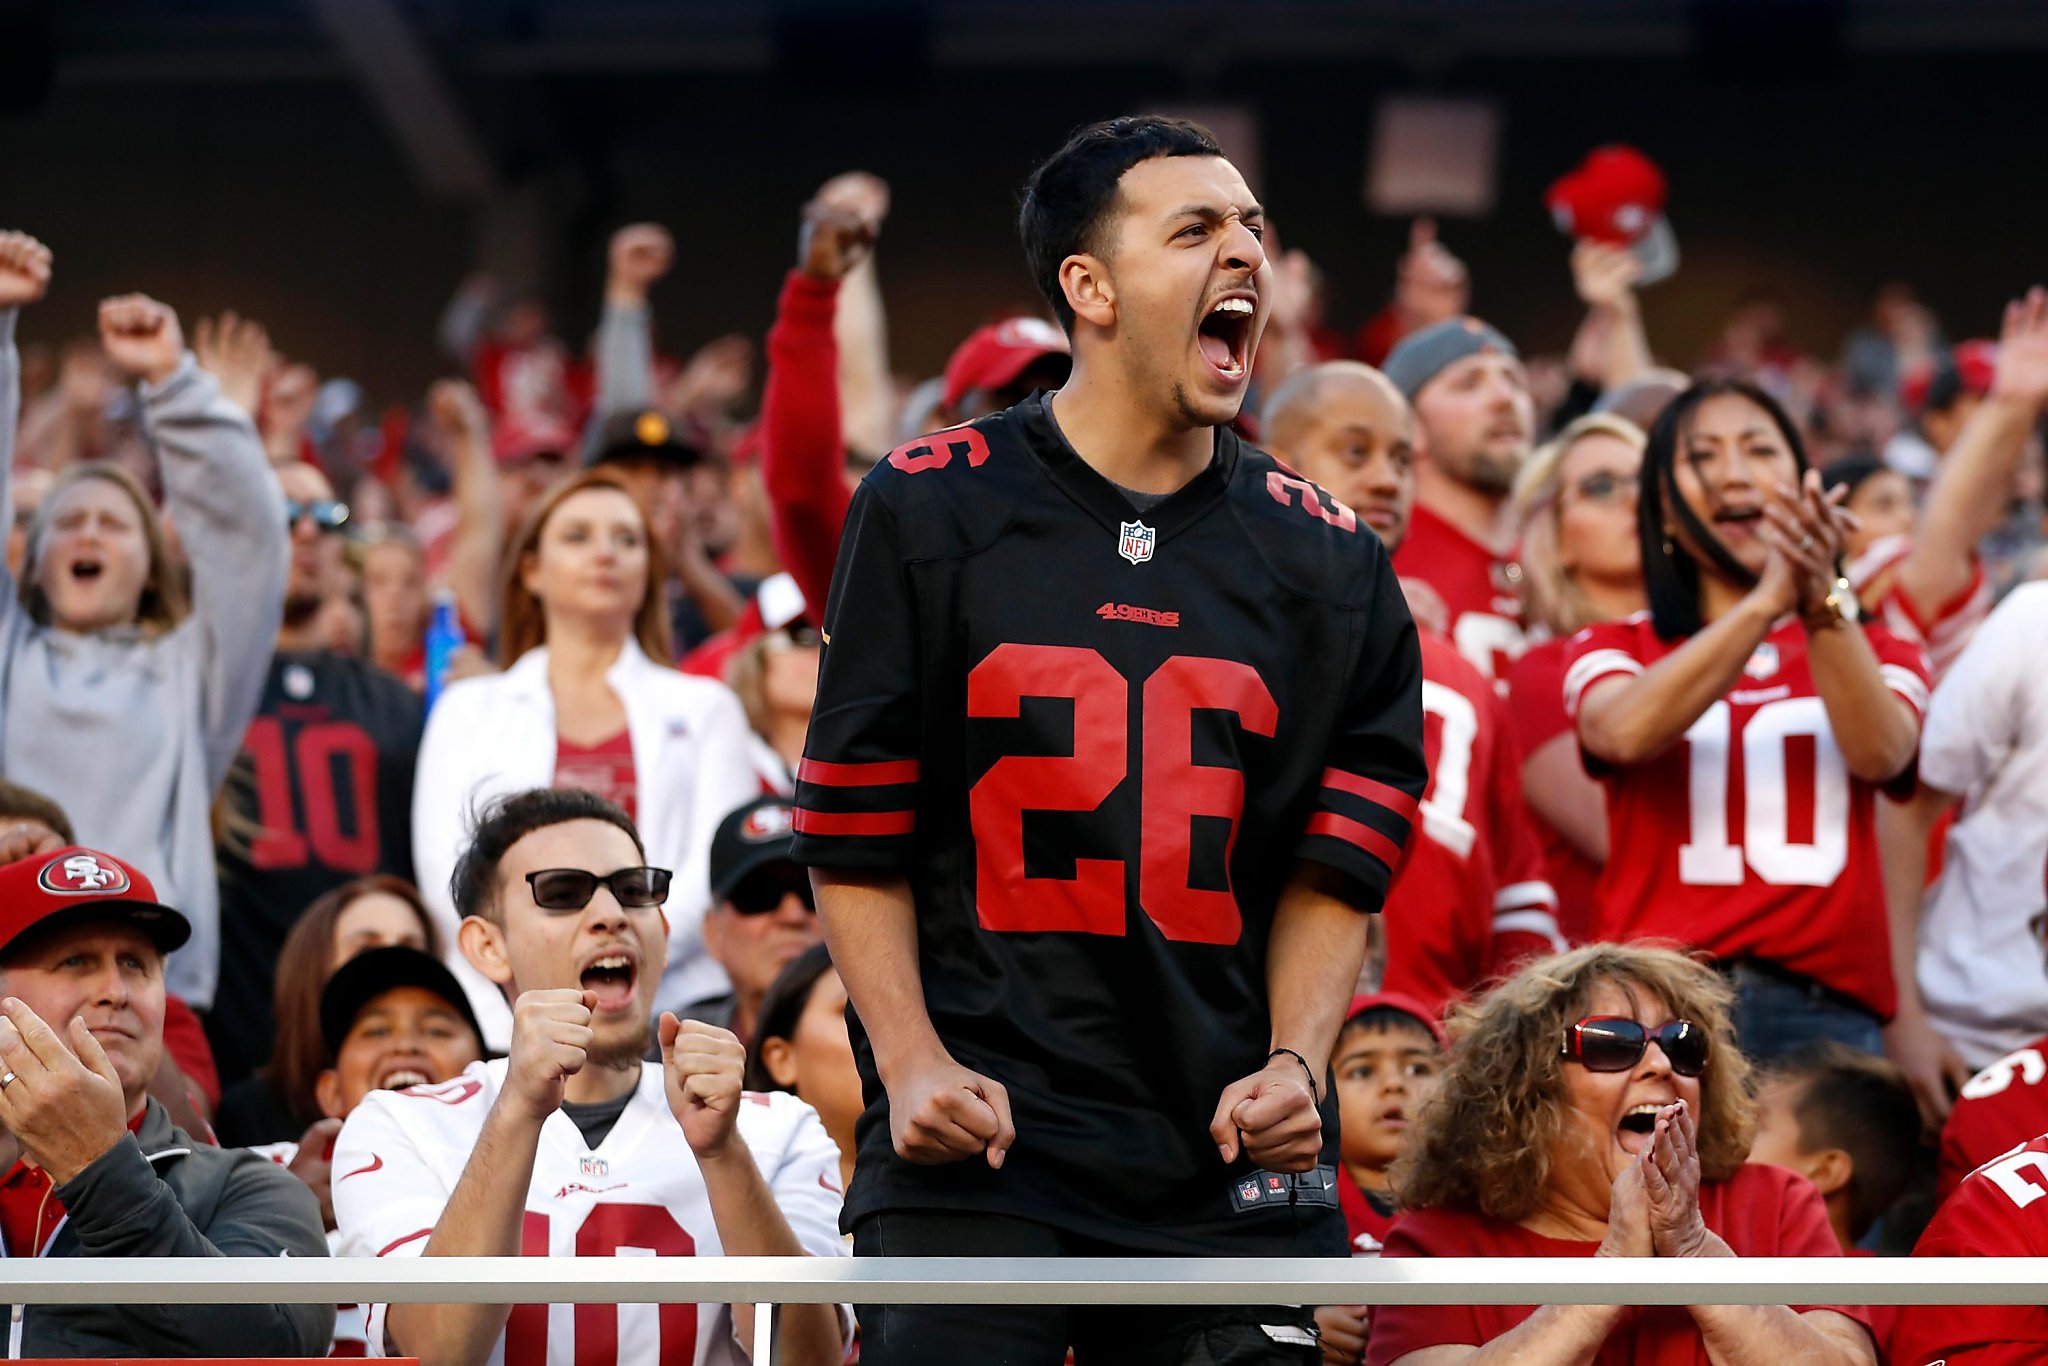 Myth: 49ers fans can lift their team to victory Saturday